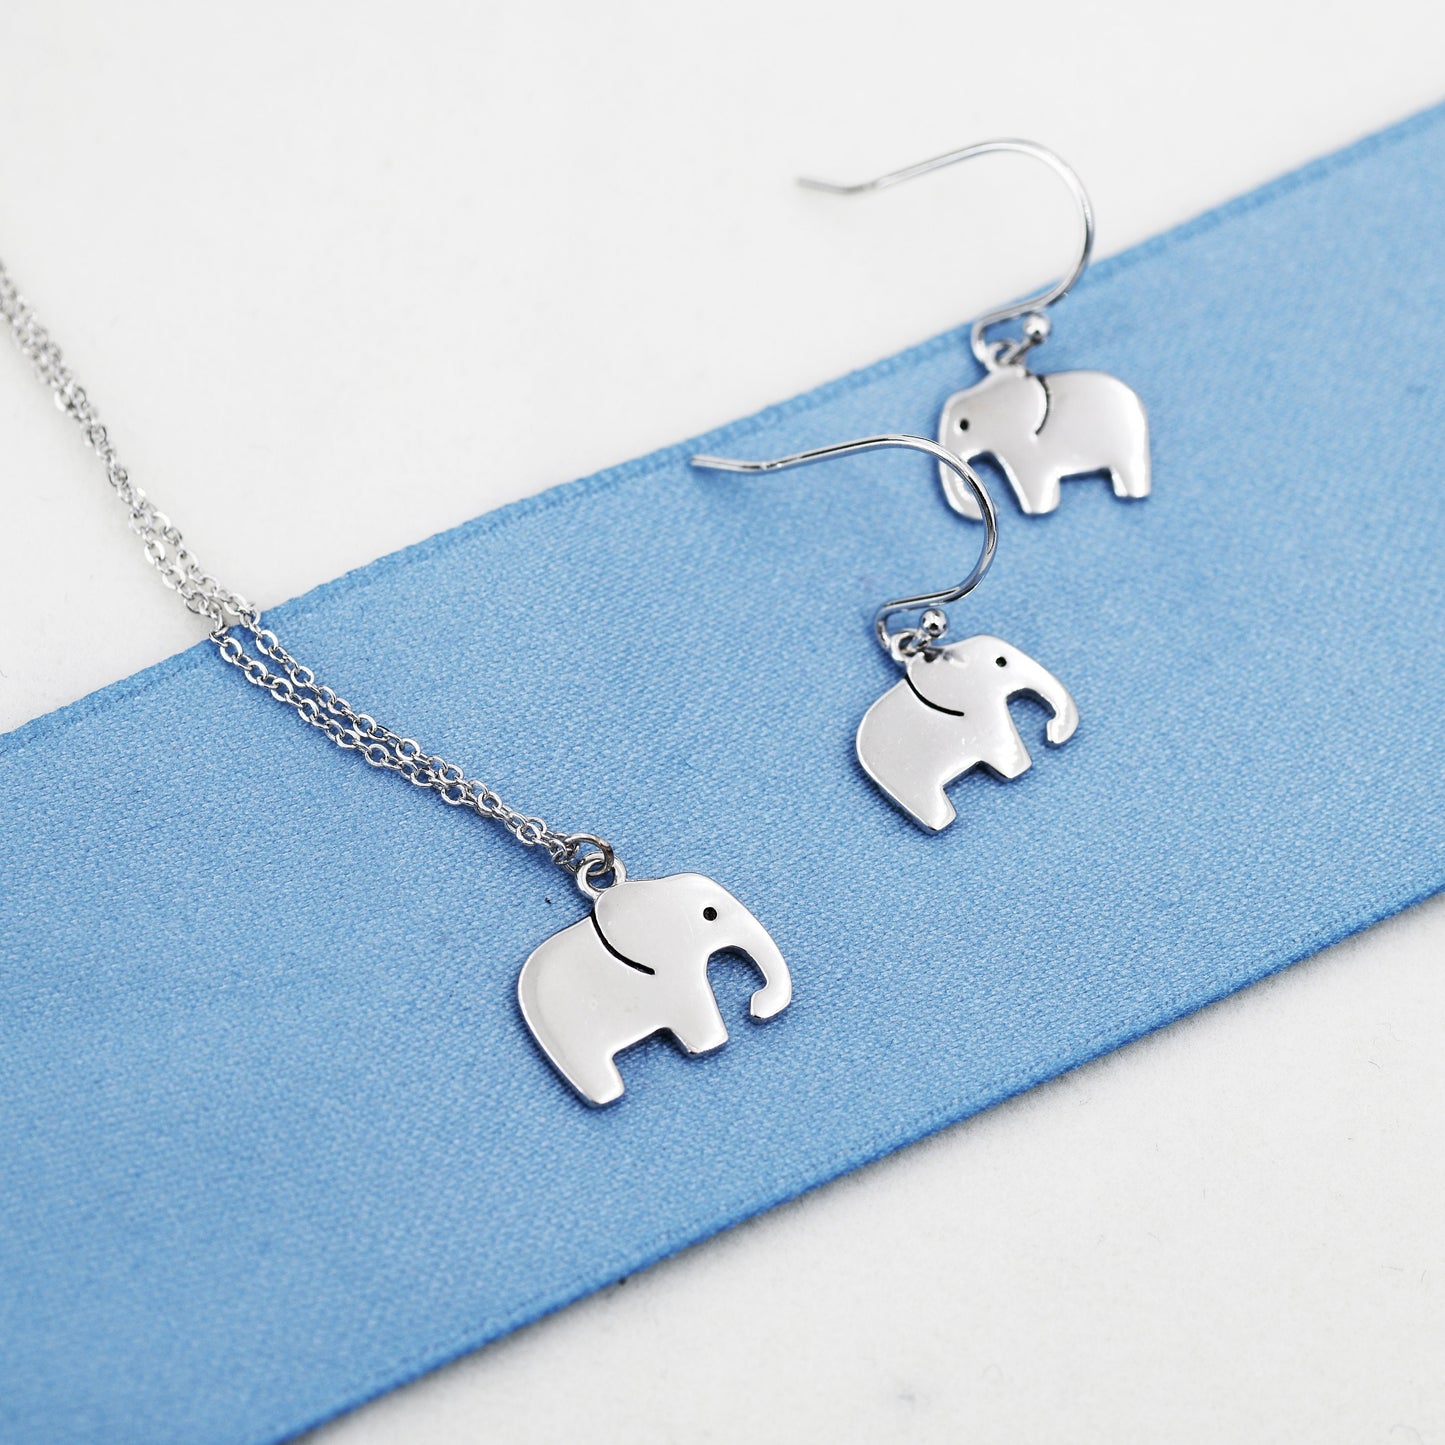 Elephant Necklace and Dangle Earrings in Sterling Silver, Silver Animal Earrings and Pendant, Nature Inspired Jewellery